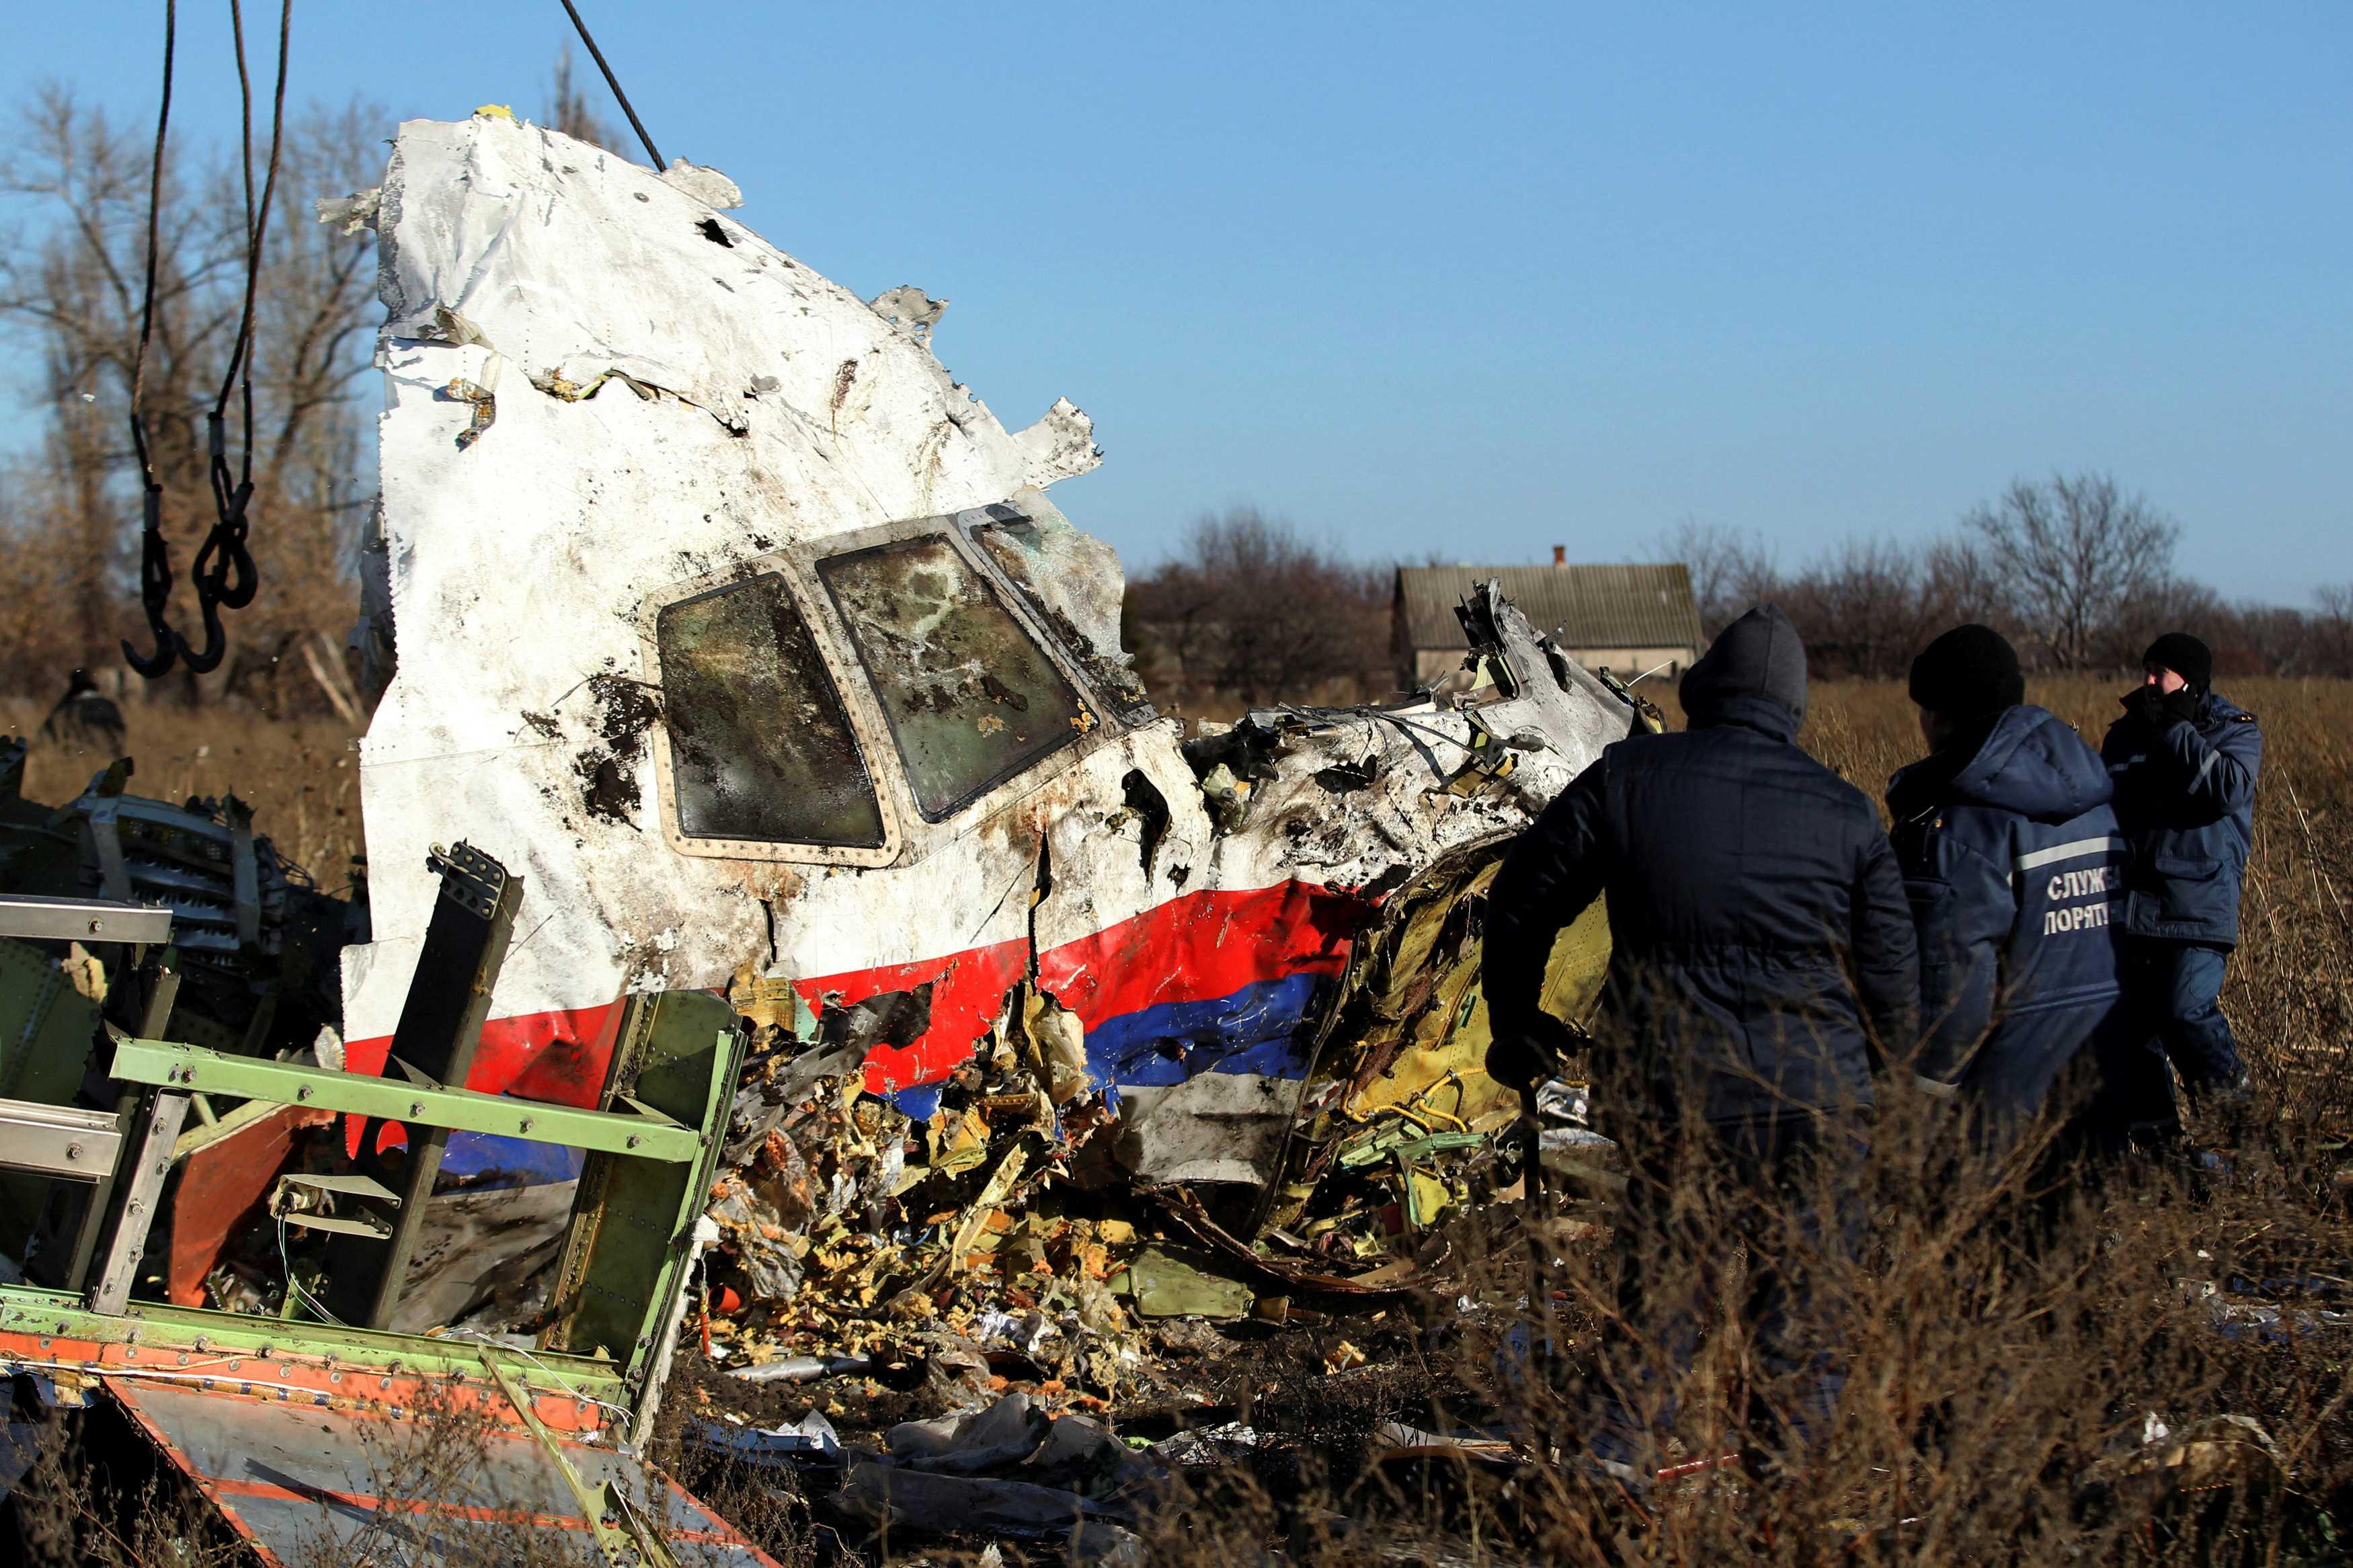 Local workers transport a piece of wreckage from Malaysia Airlines flight MH17 at the site of the plane crash near the village of Hrabove (Grabovo) in Donetsk region, eastern Ukraine Nov 20, 2014. Photo: Reuters